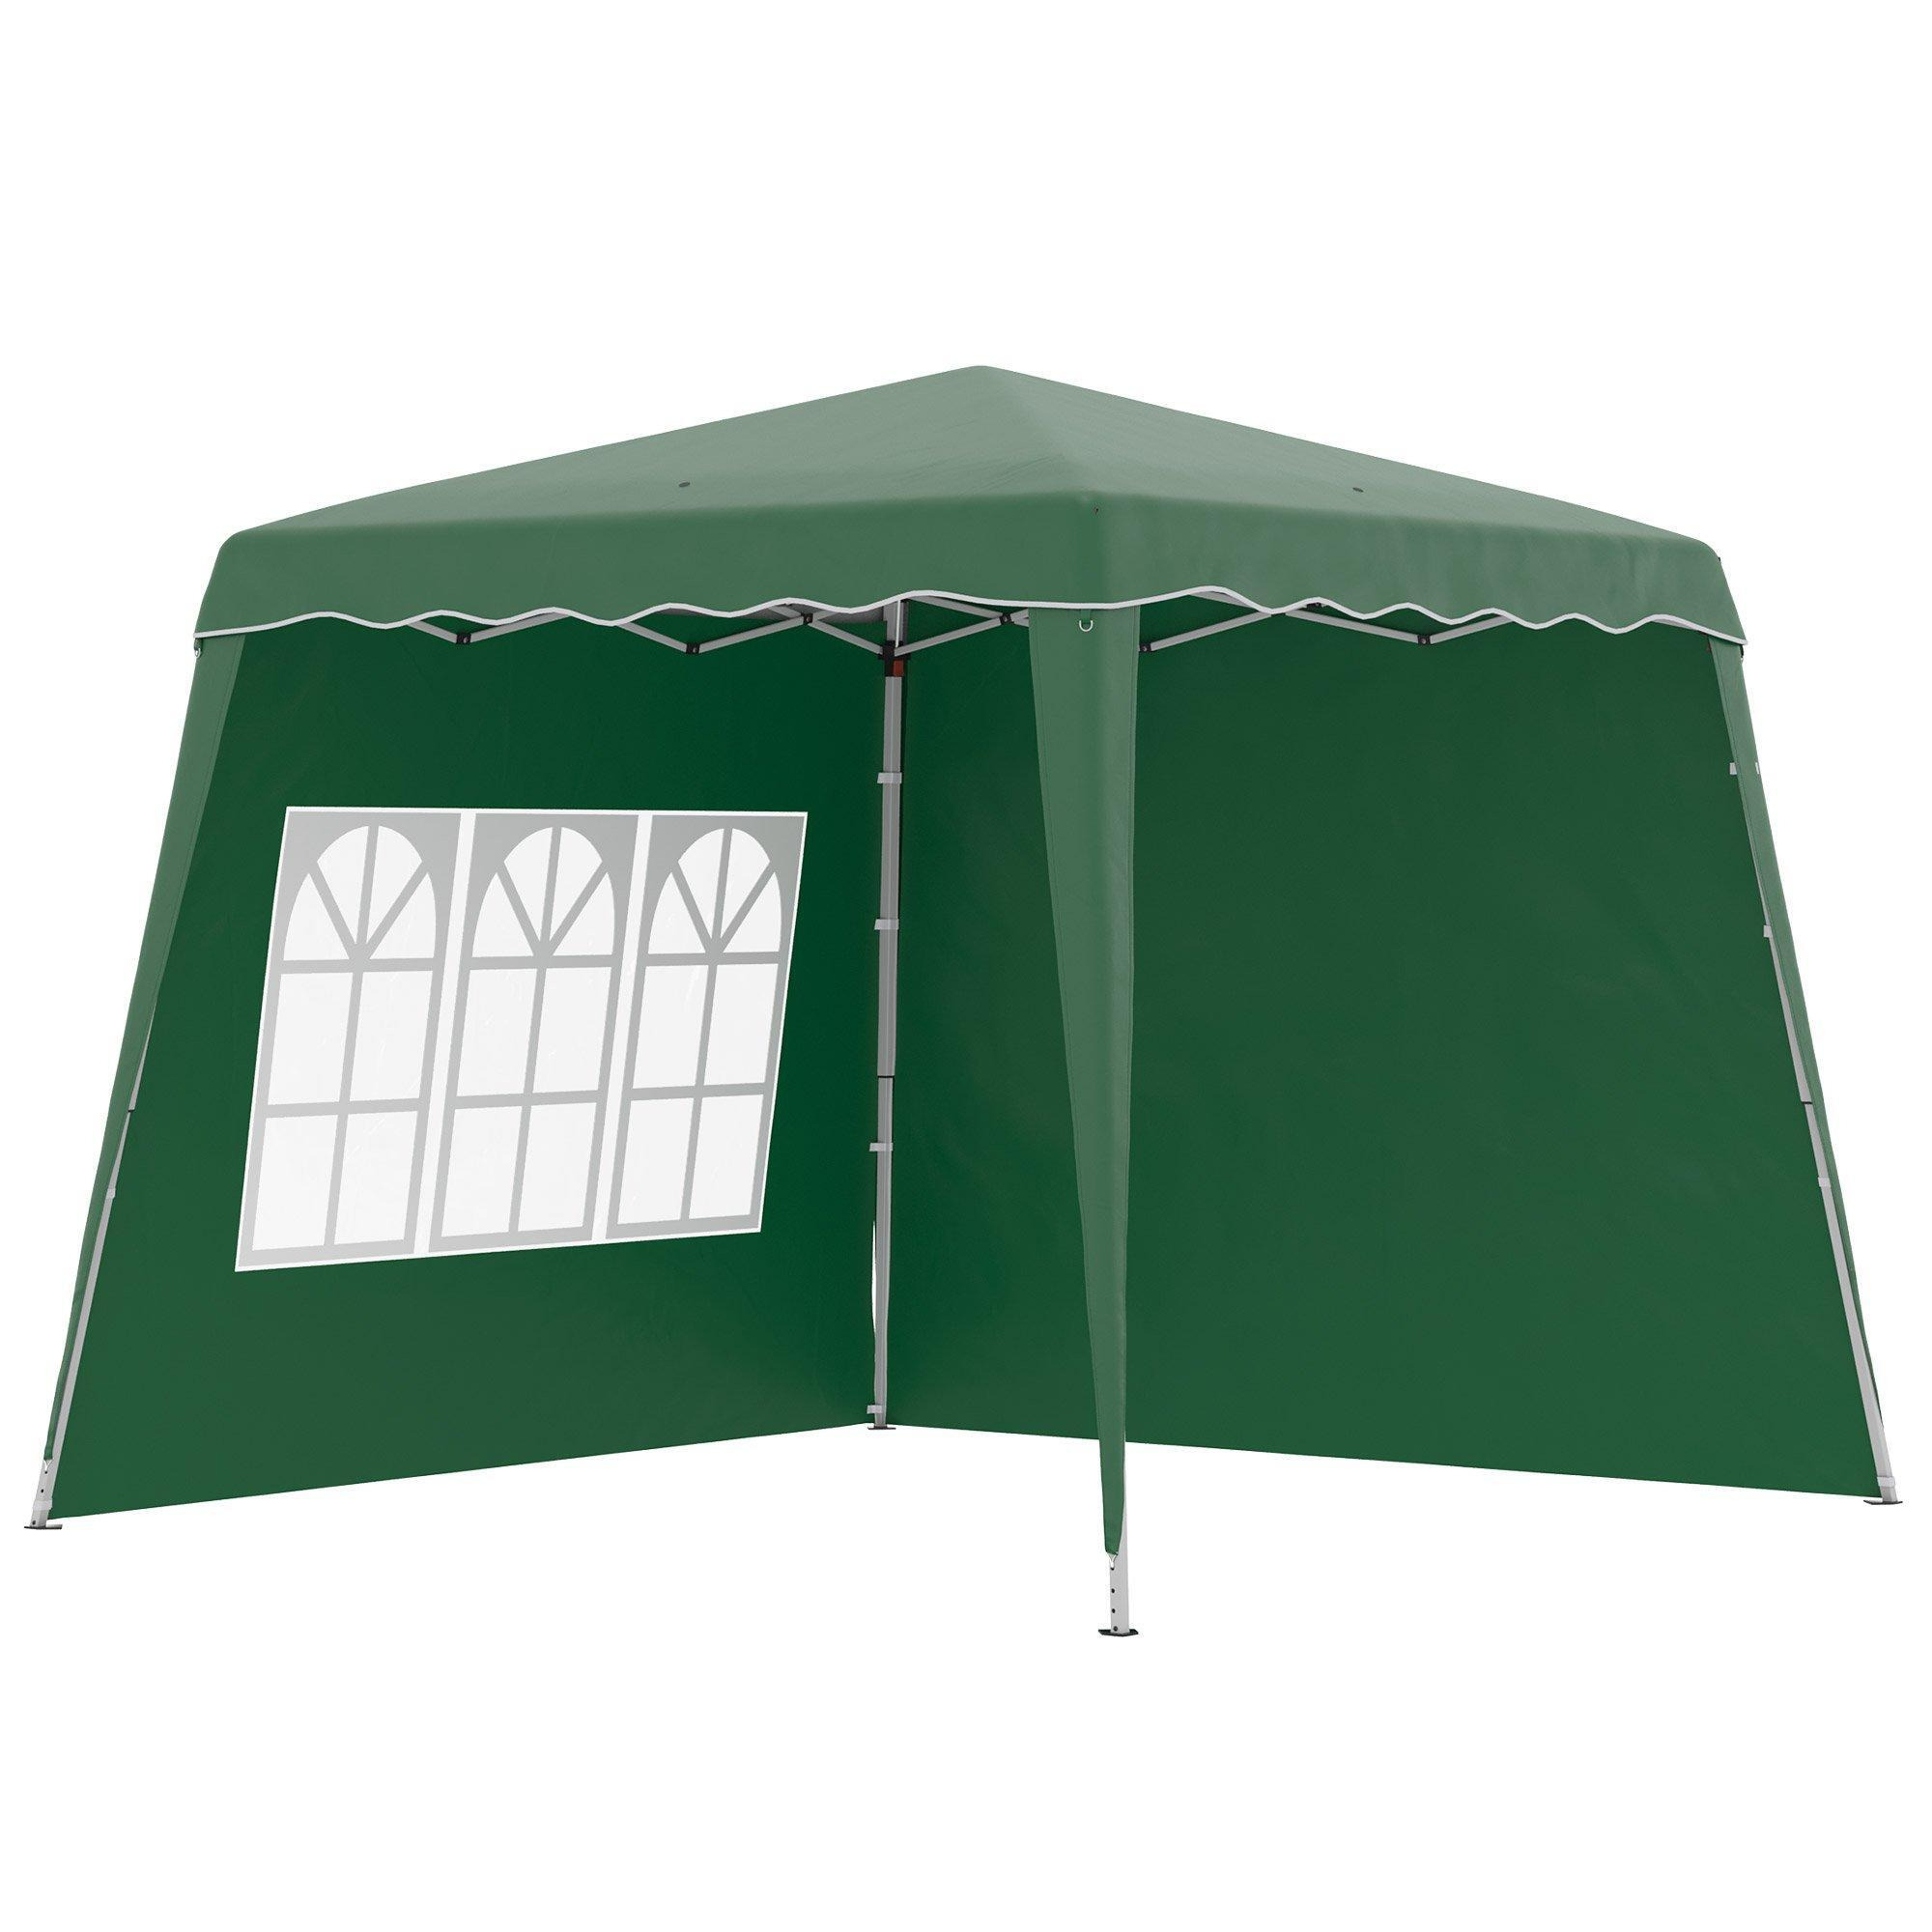 UV50+ Pop Up Gazebo Canopy Tent with Carry Bag, 2.4 x 2.4m - image 1